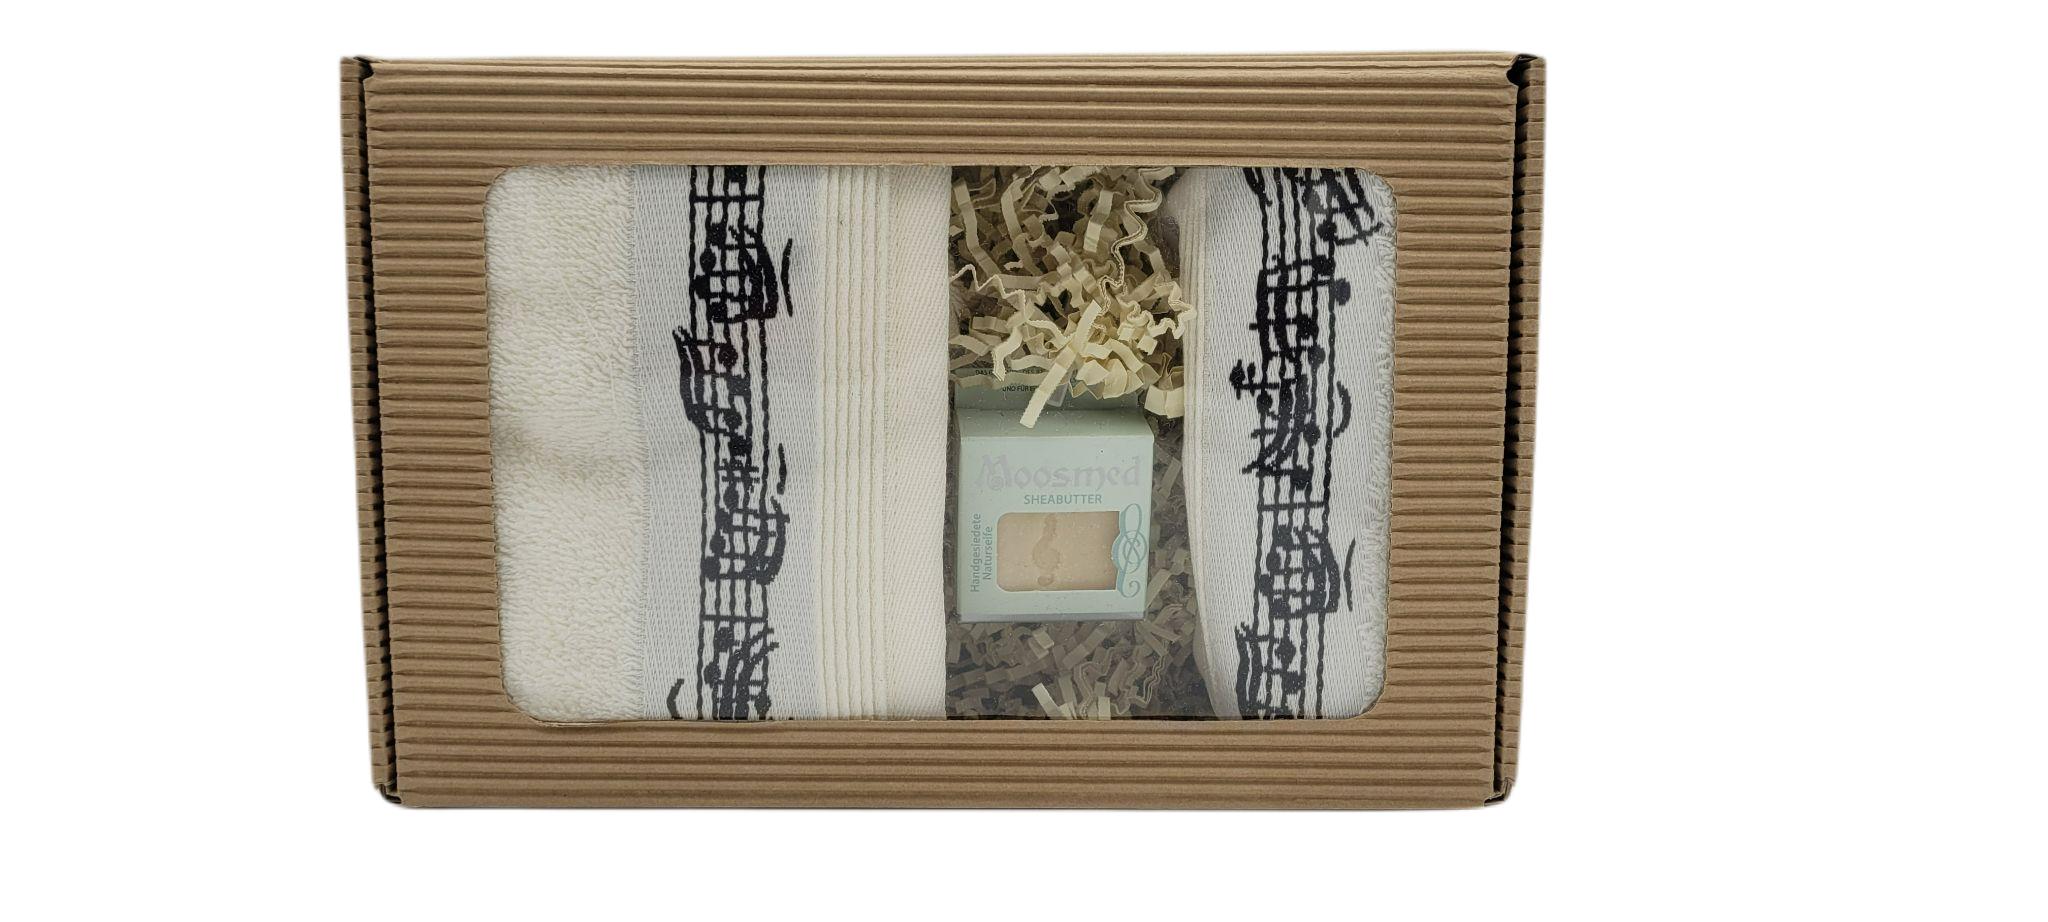 Musical gift set with guest towel, wash mitt and mini soap in gift box